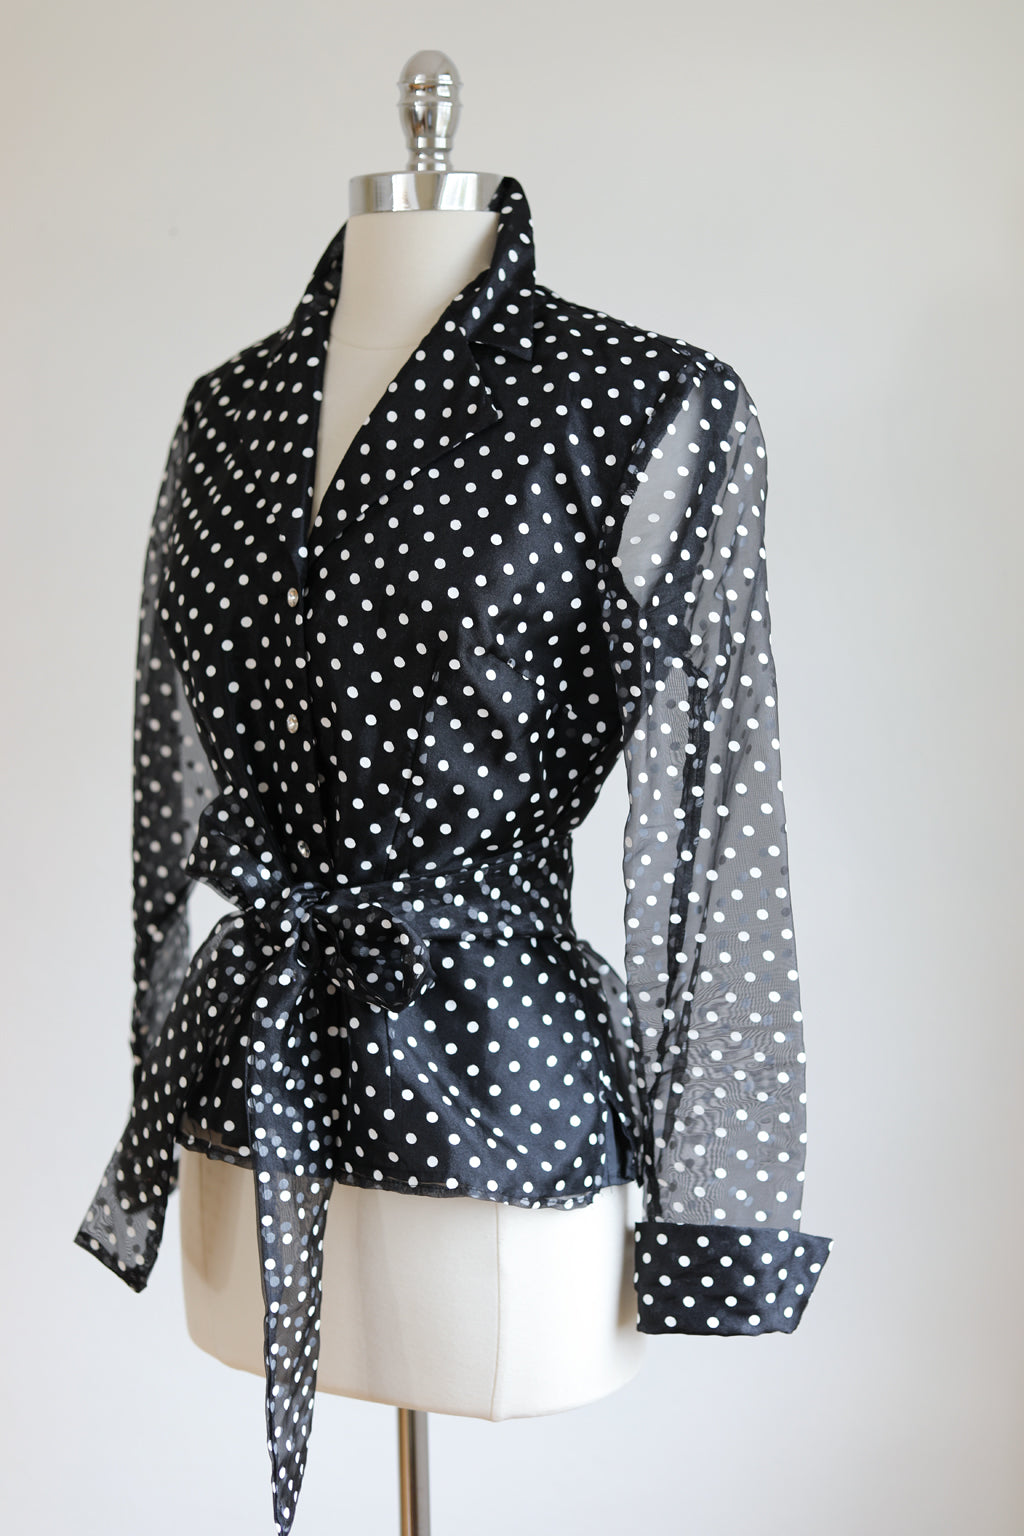 Vintage 1980s does 1950s Blouse - Black White "Painted" Polka Dot w Sheer Stabby Sleeves Top + Belt Size S to M